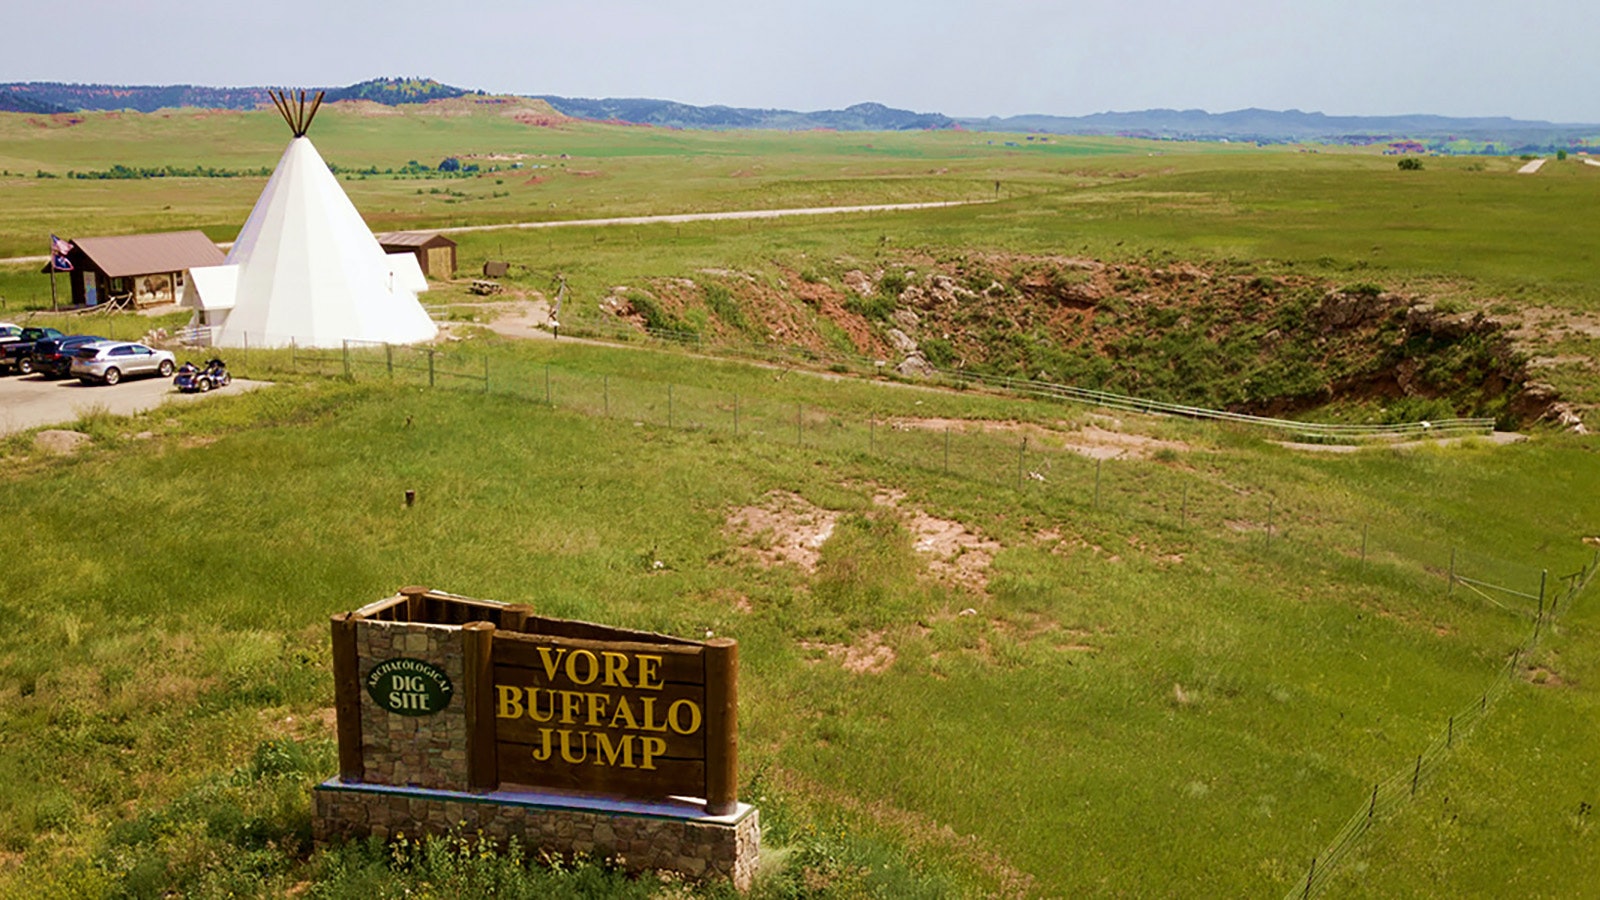 The Vore Buffalo Jump National Historic Site is about six miles from the South Dakota border near Interstate 90.